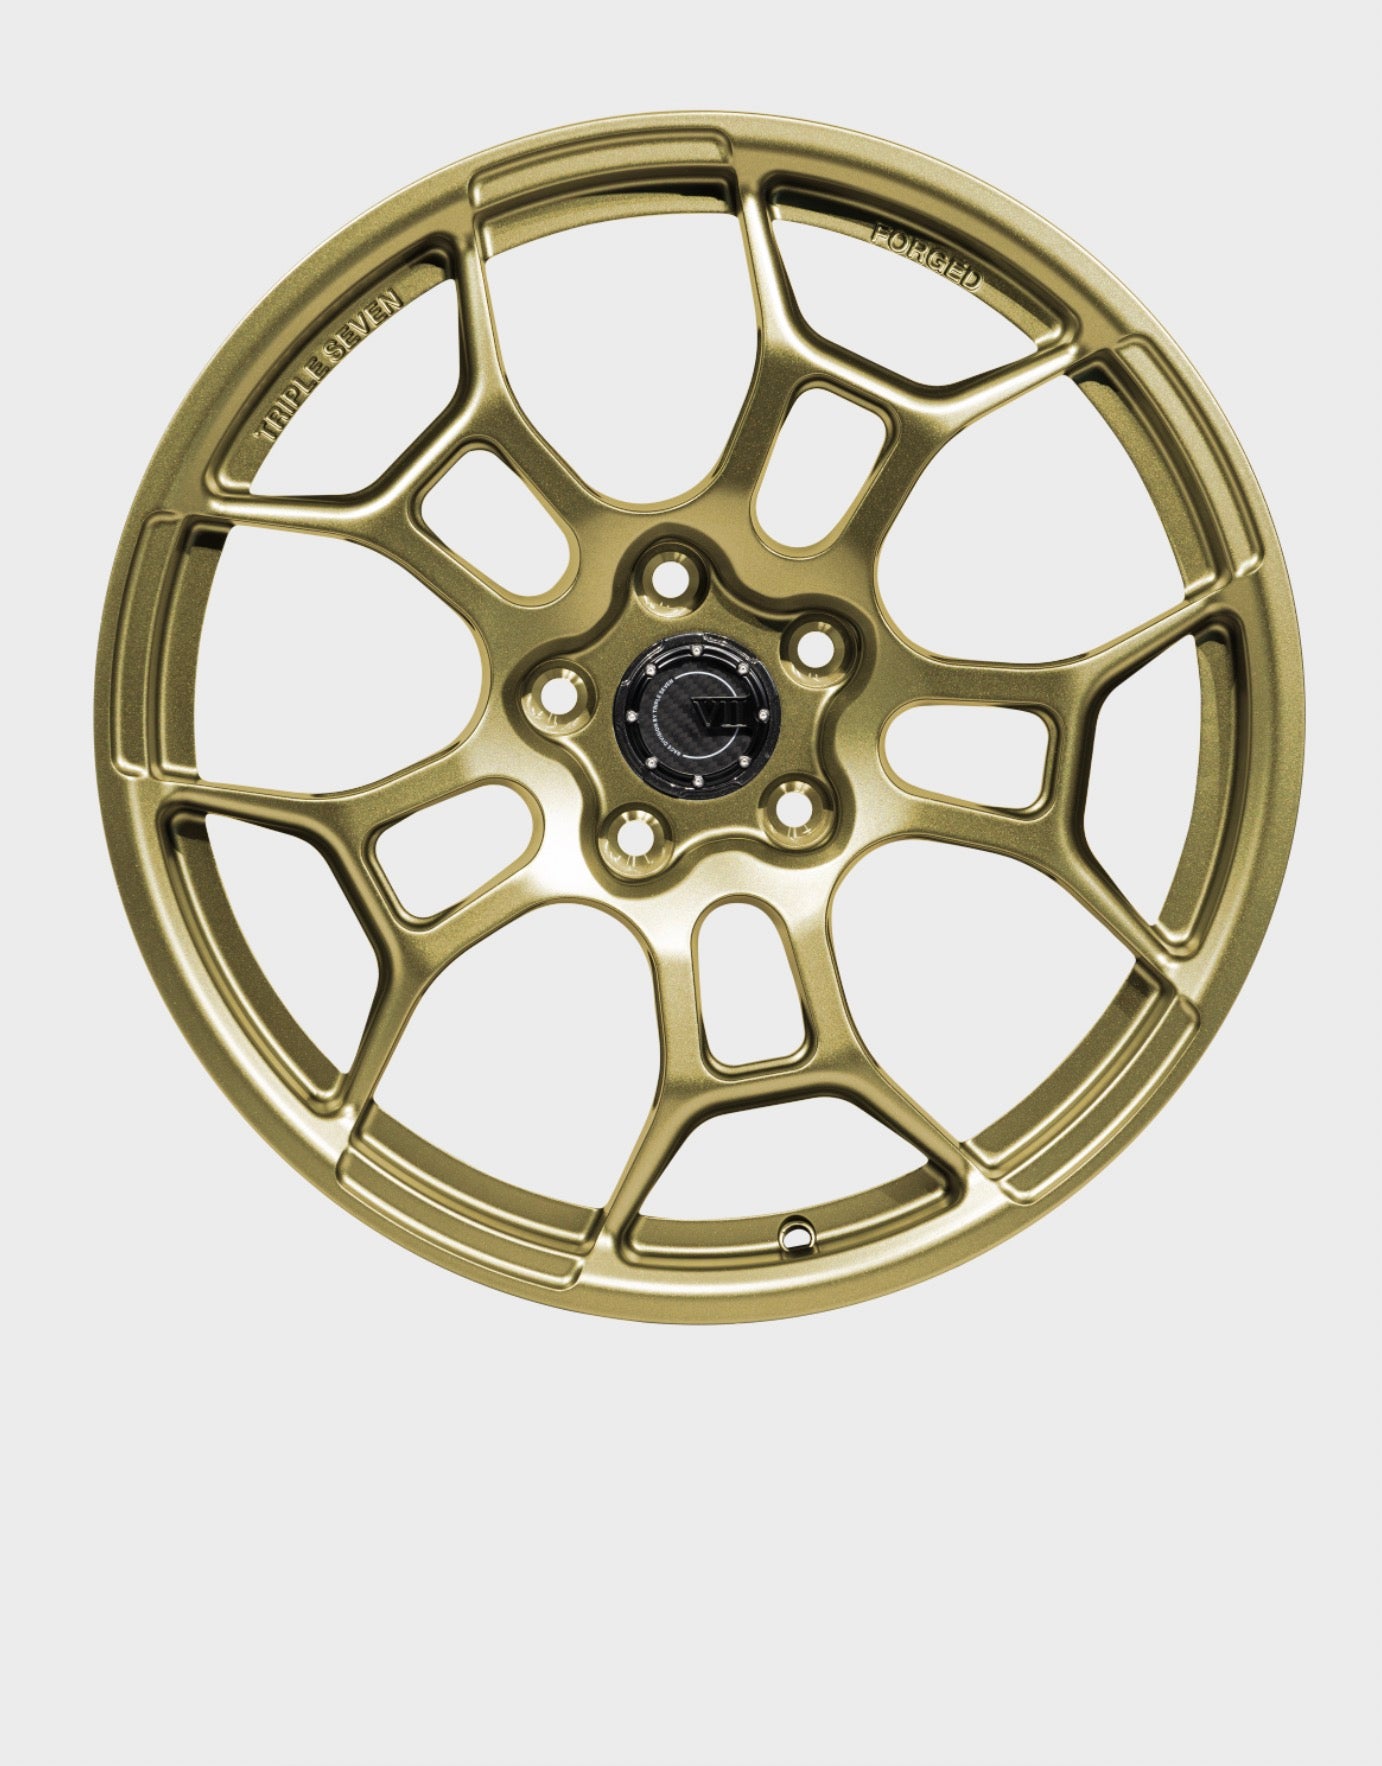 T7-5 Forged Wheel